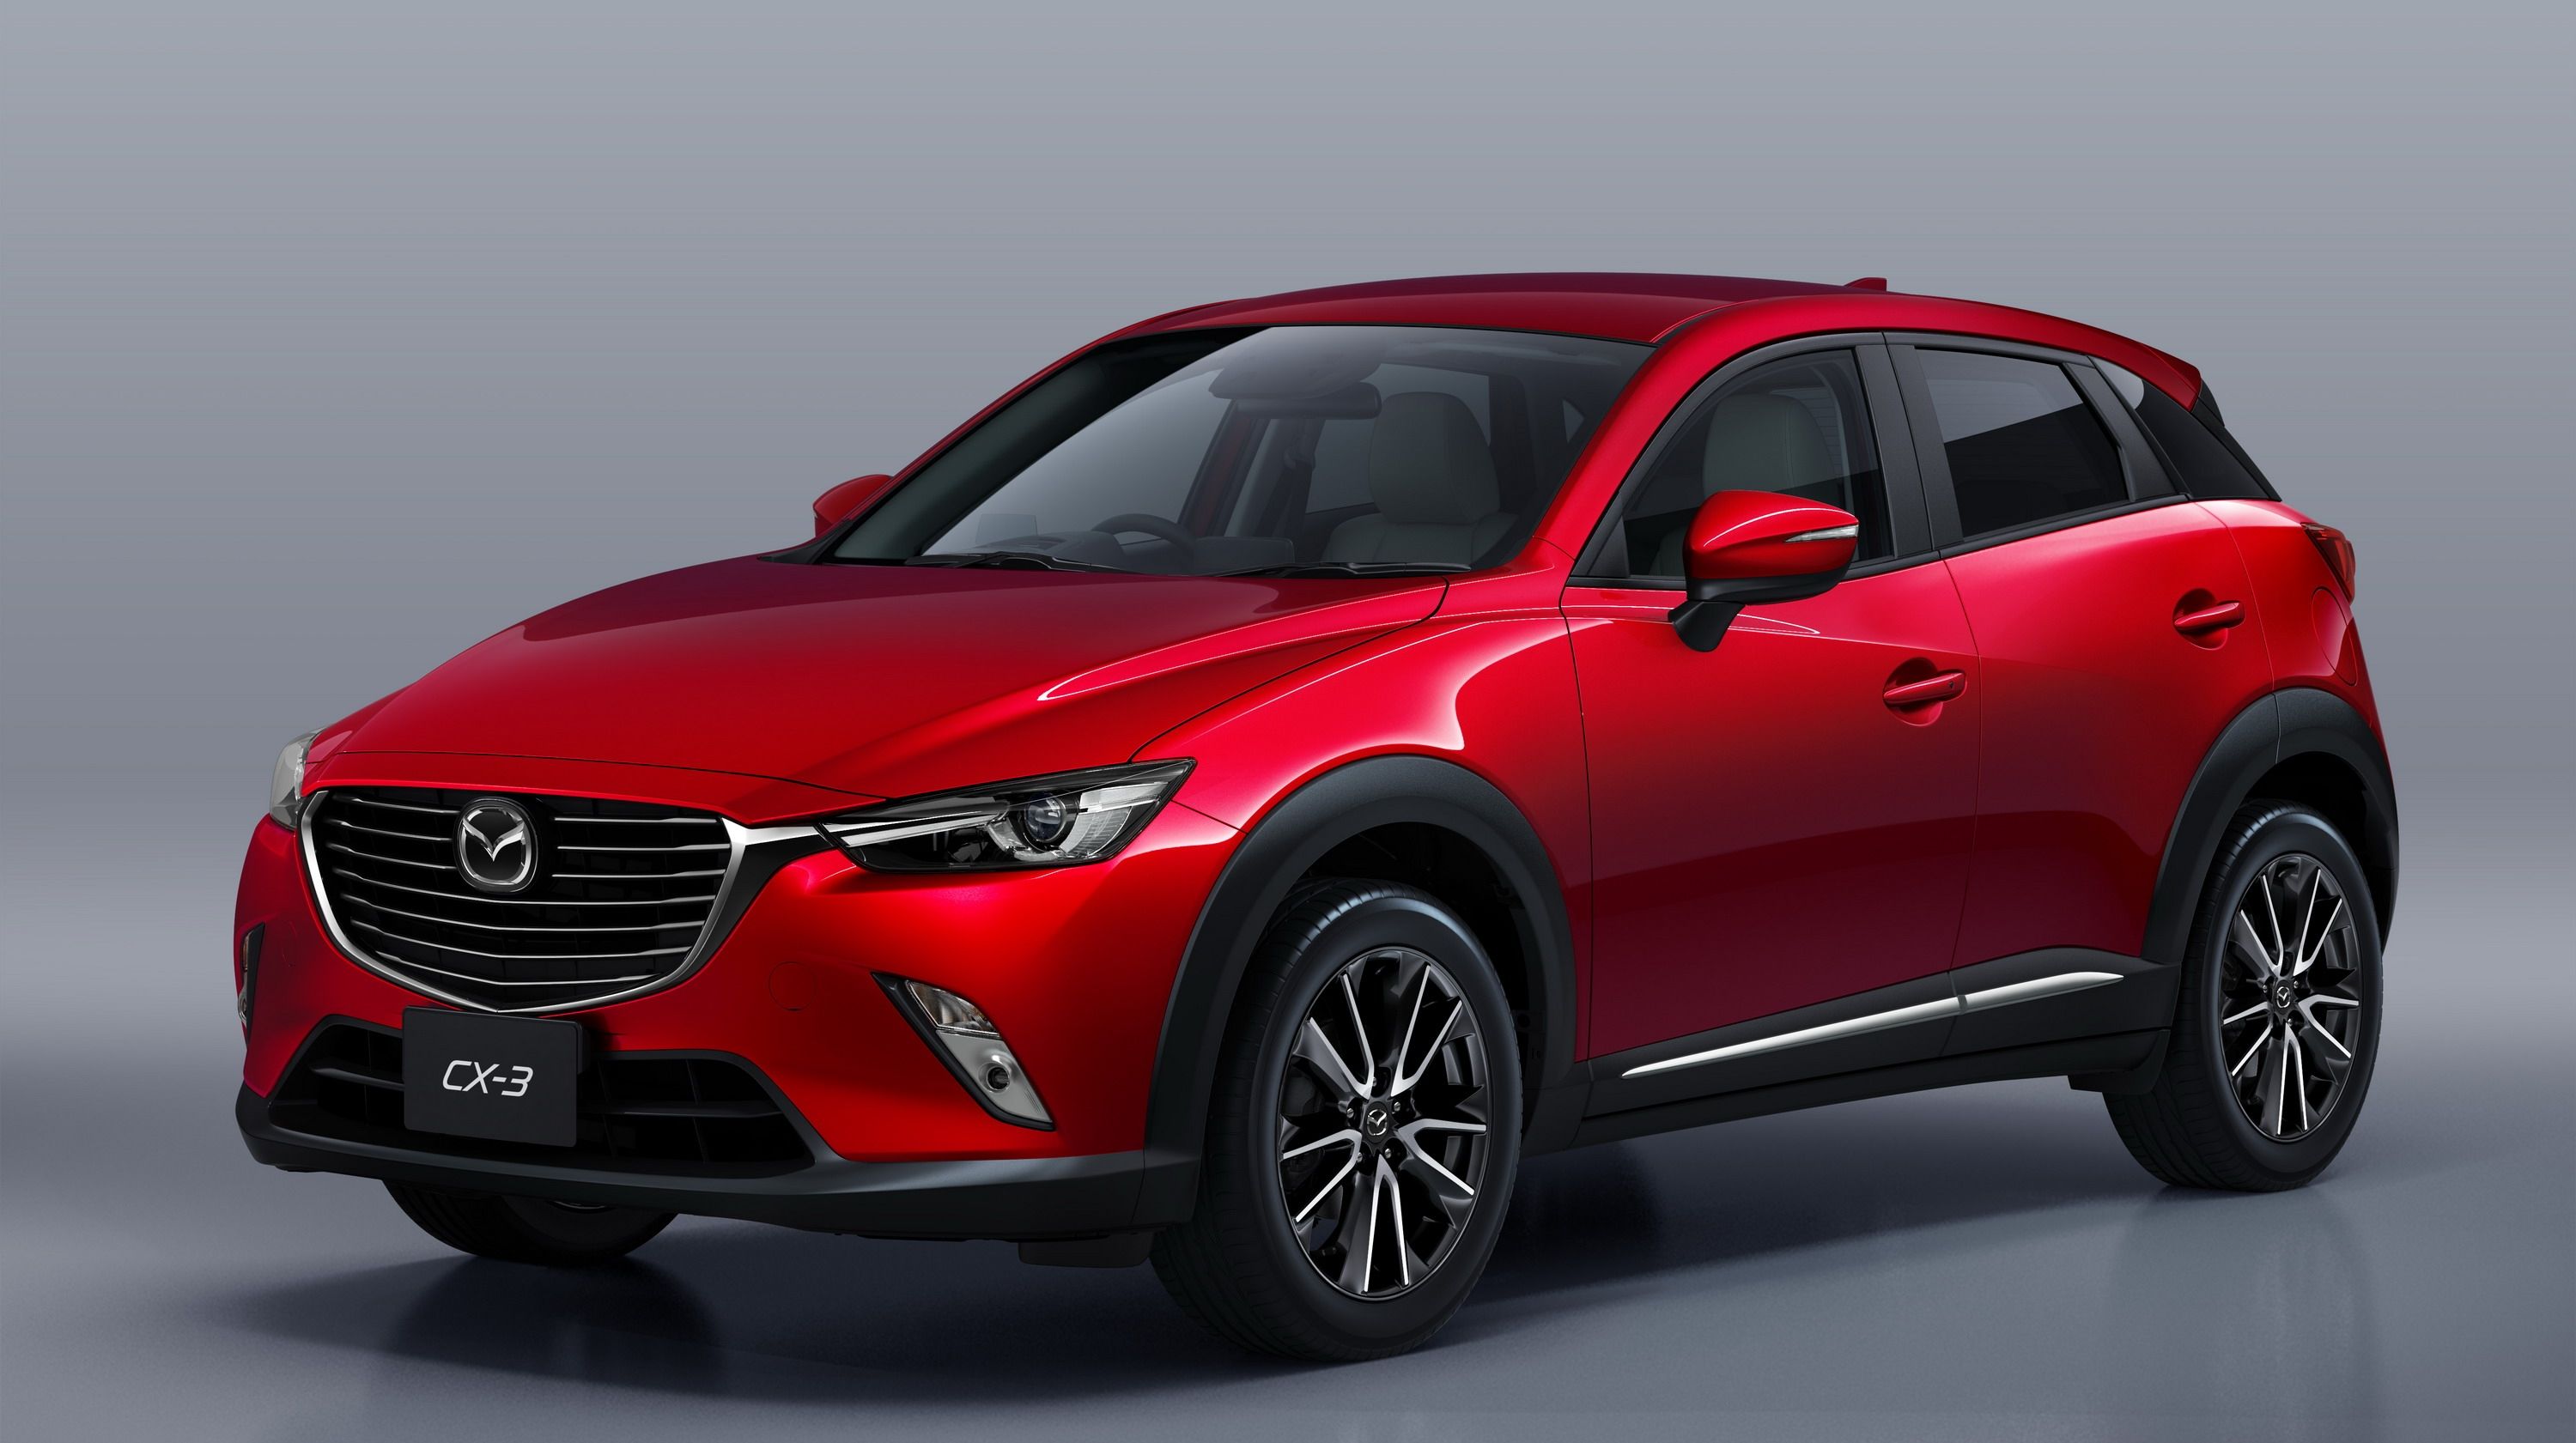  After a lot of waiting, here it is folks: the 2016 Mazda CX-3.